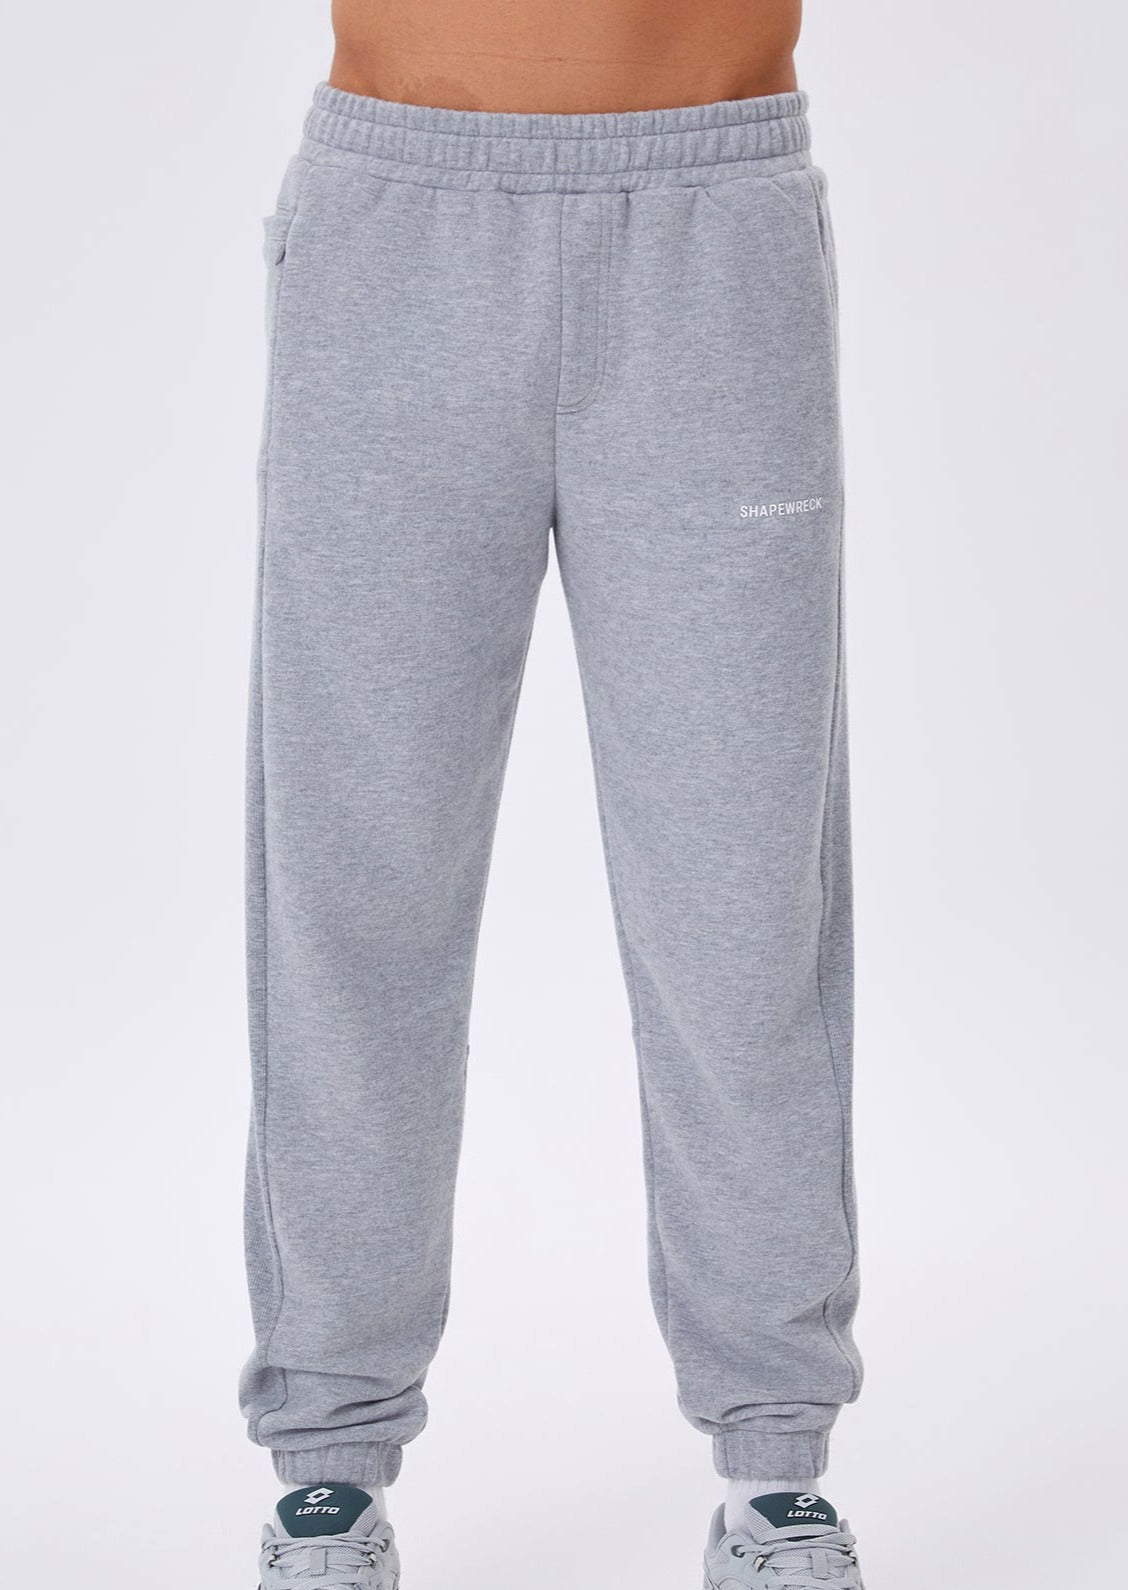 RELAXED FIT Sweatpant PRIMARY JOGGER - WINTER GREY